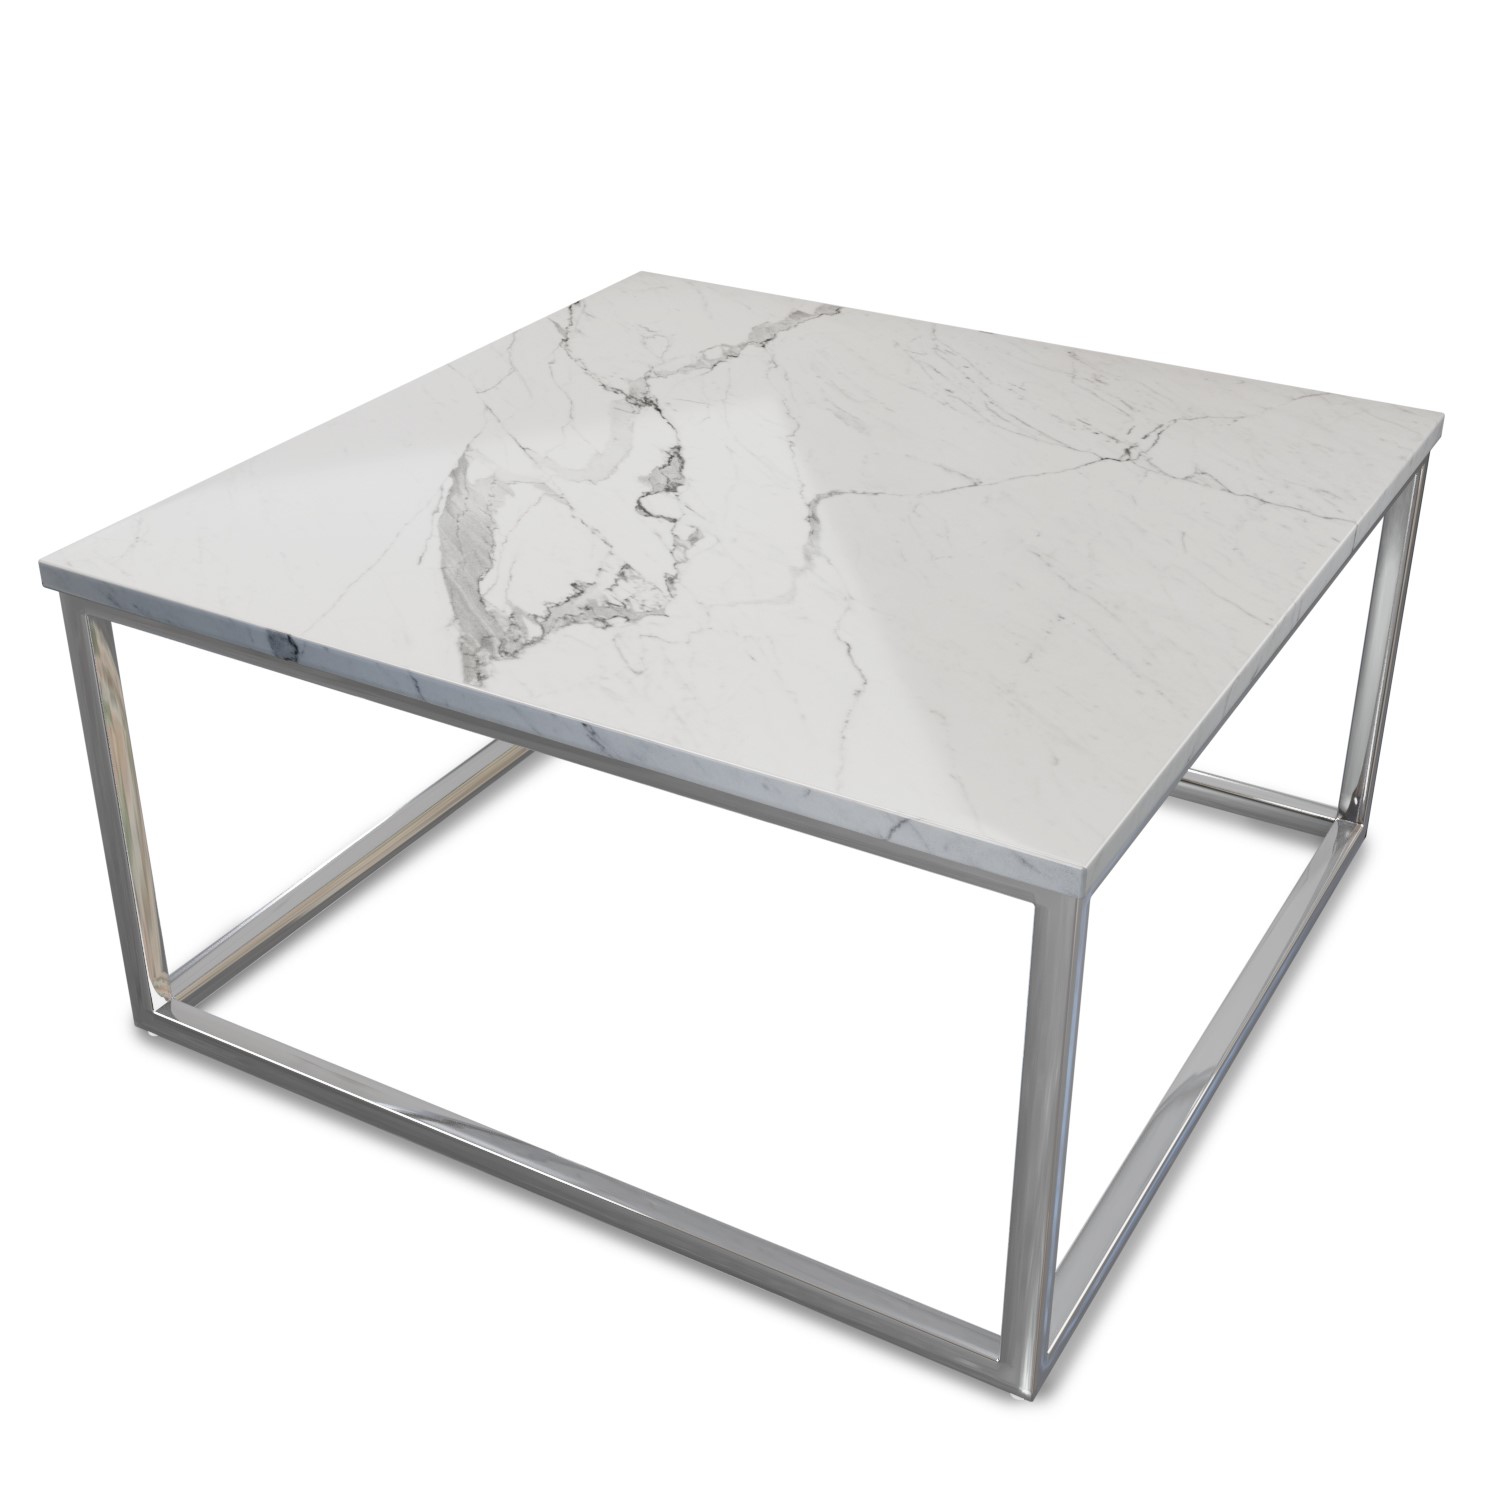 Read more about Small square white marble coffee table demi